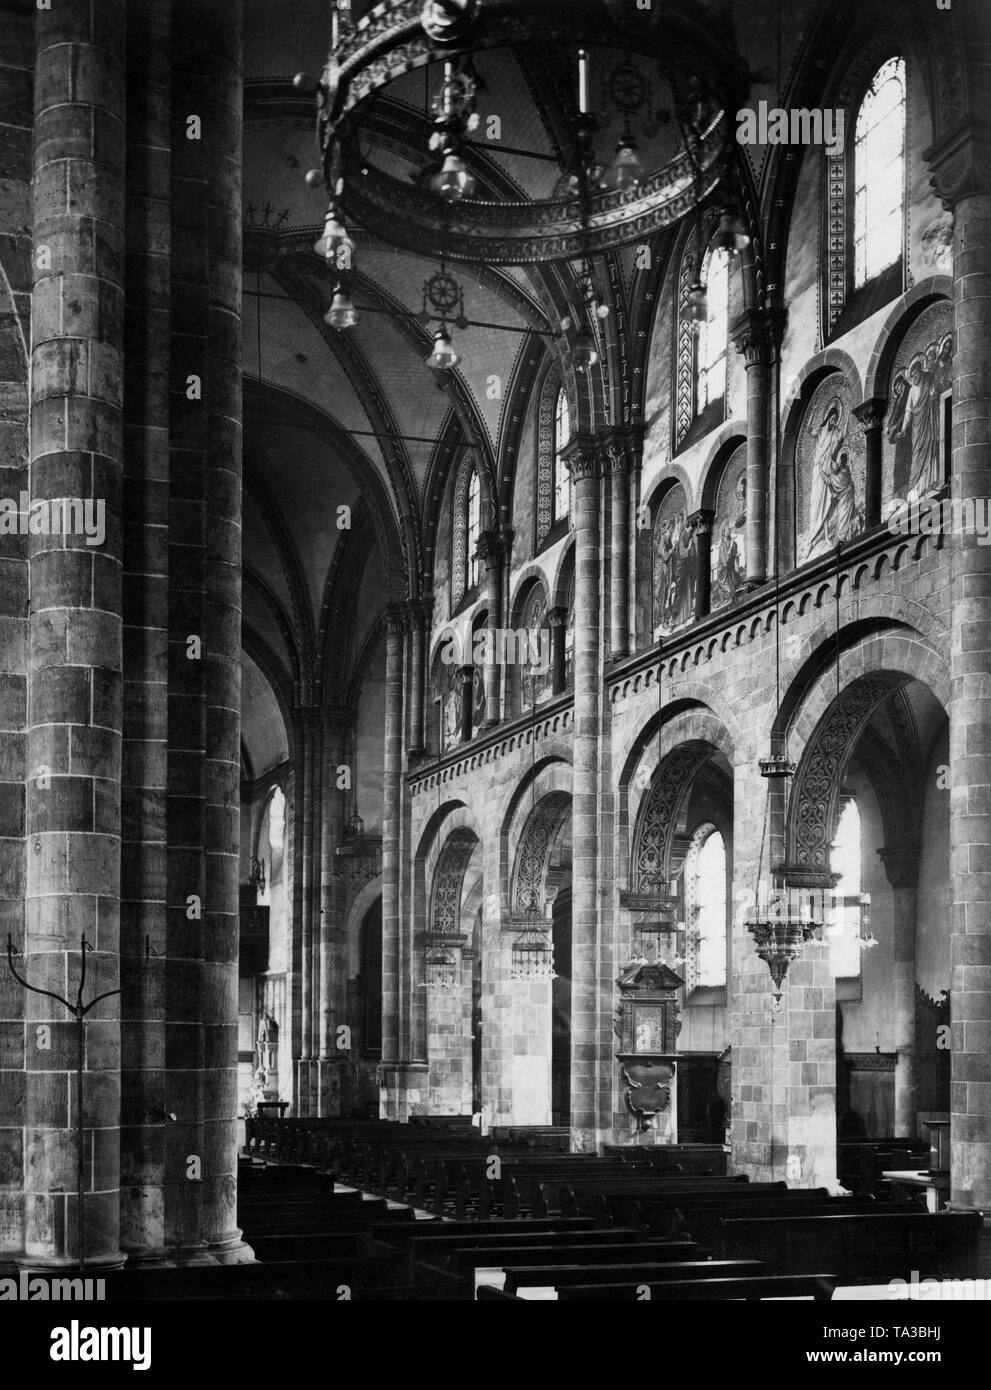 Interior view of the nave of the Basilica of the Holy Apostles in Cologne. The upper part of the walls has mosaics. Undated photo. Stock Photo